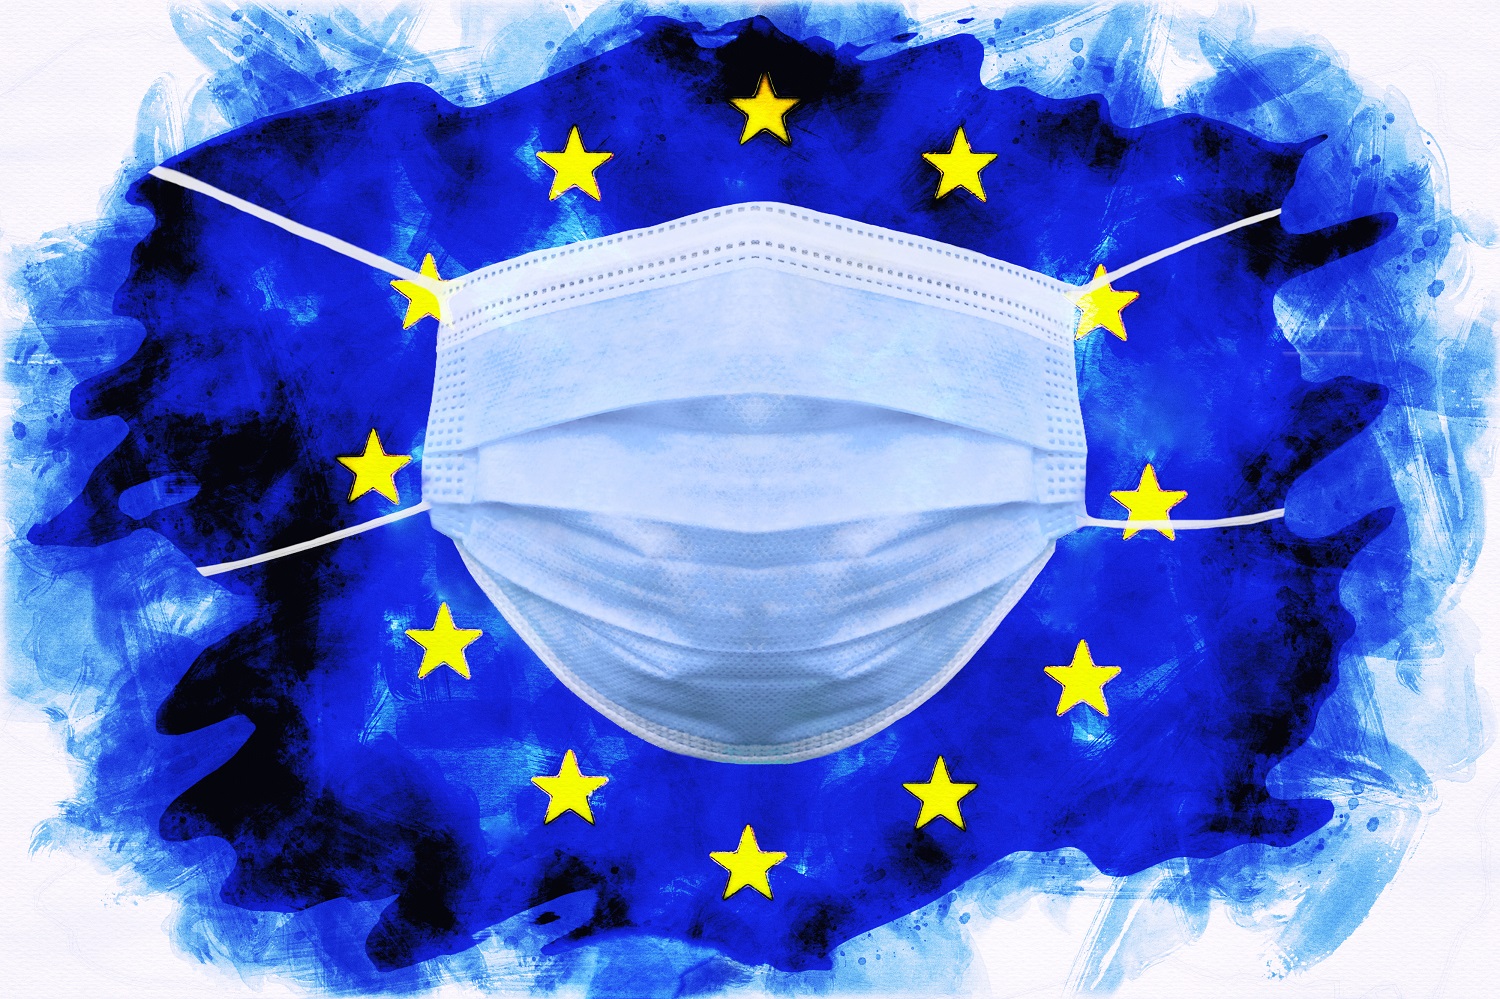 Coronavirus: Implications for the EU [What Think Tanks are thinking]